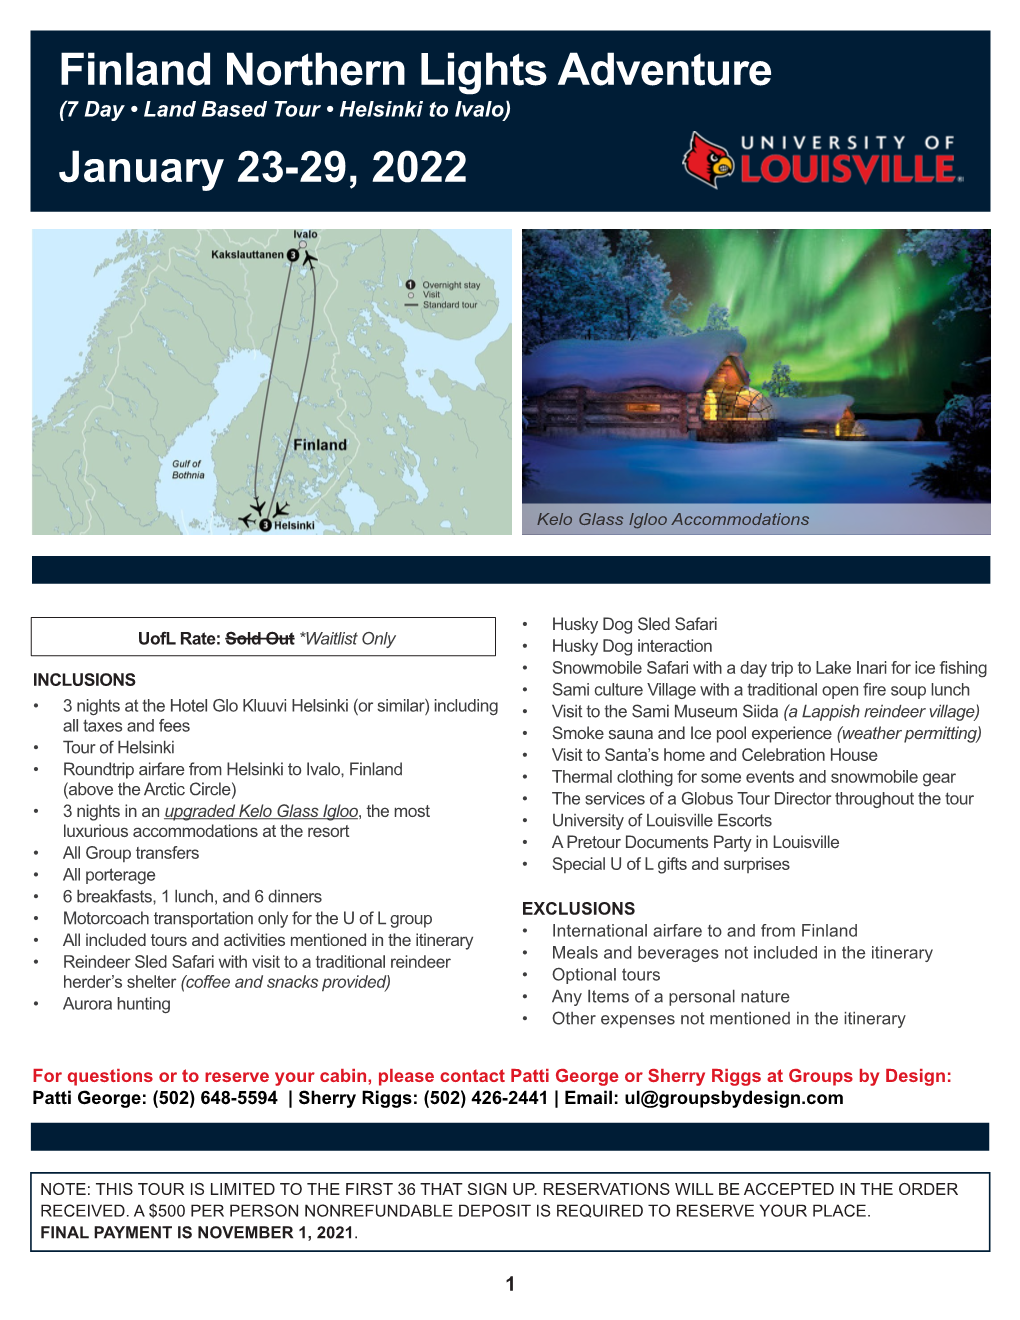 Finland Northern Lights Adventure (7 Day • Land Based Tour • Helsinki to Ivalo) January 23-29, 2022